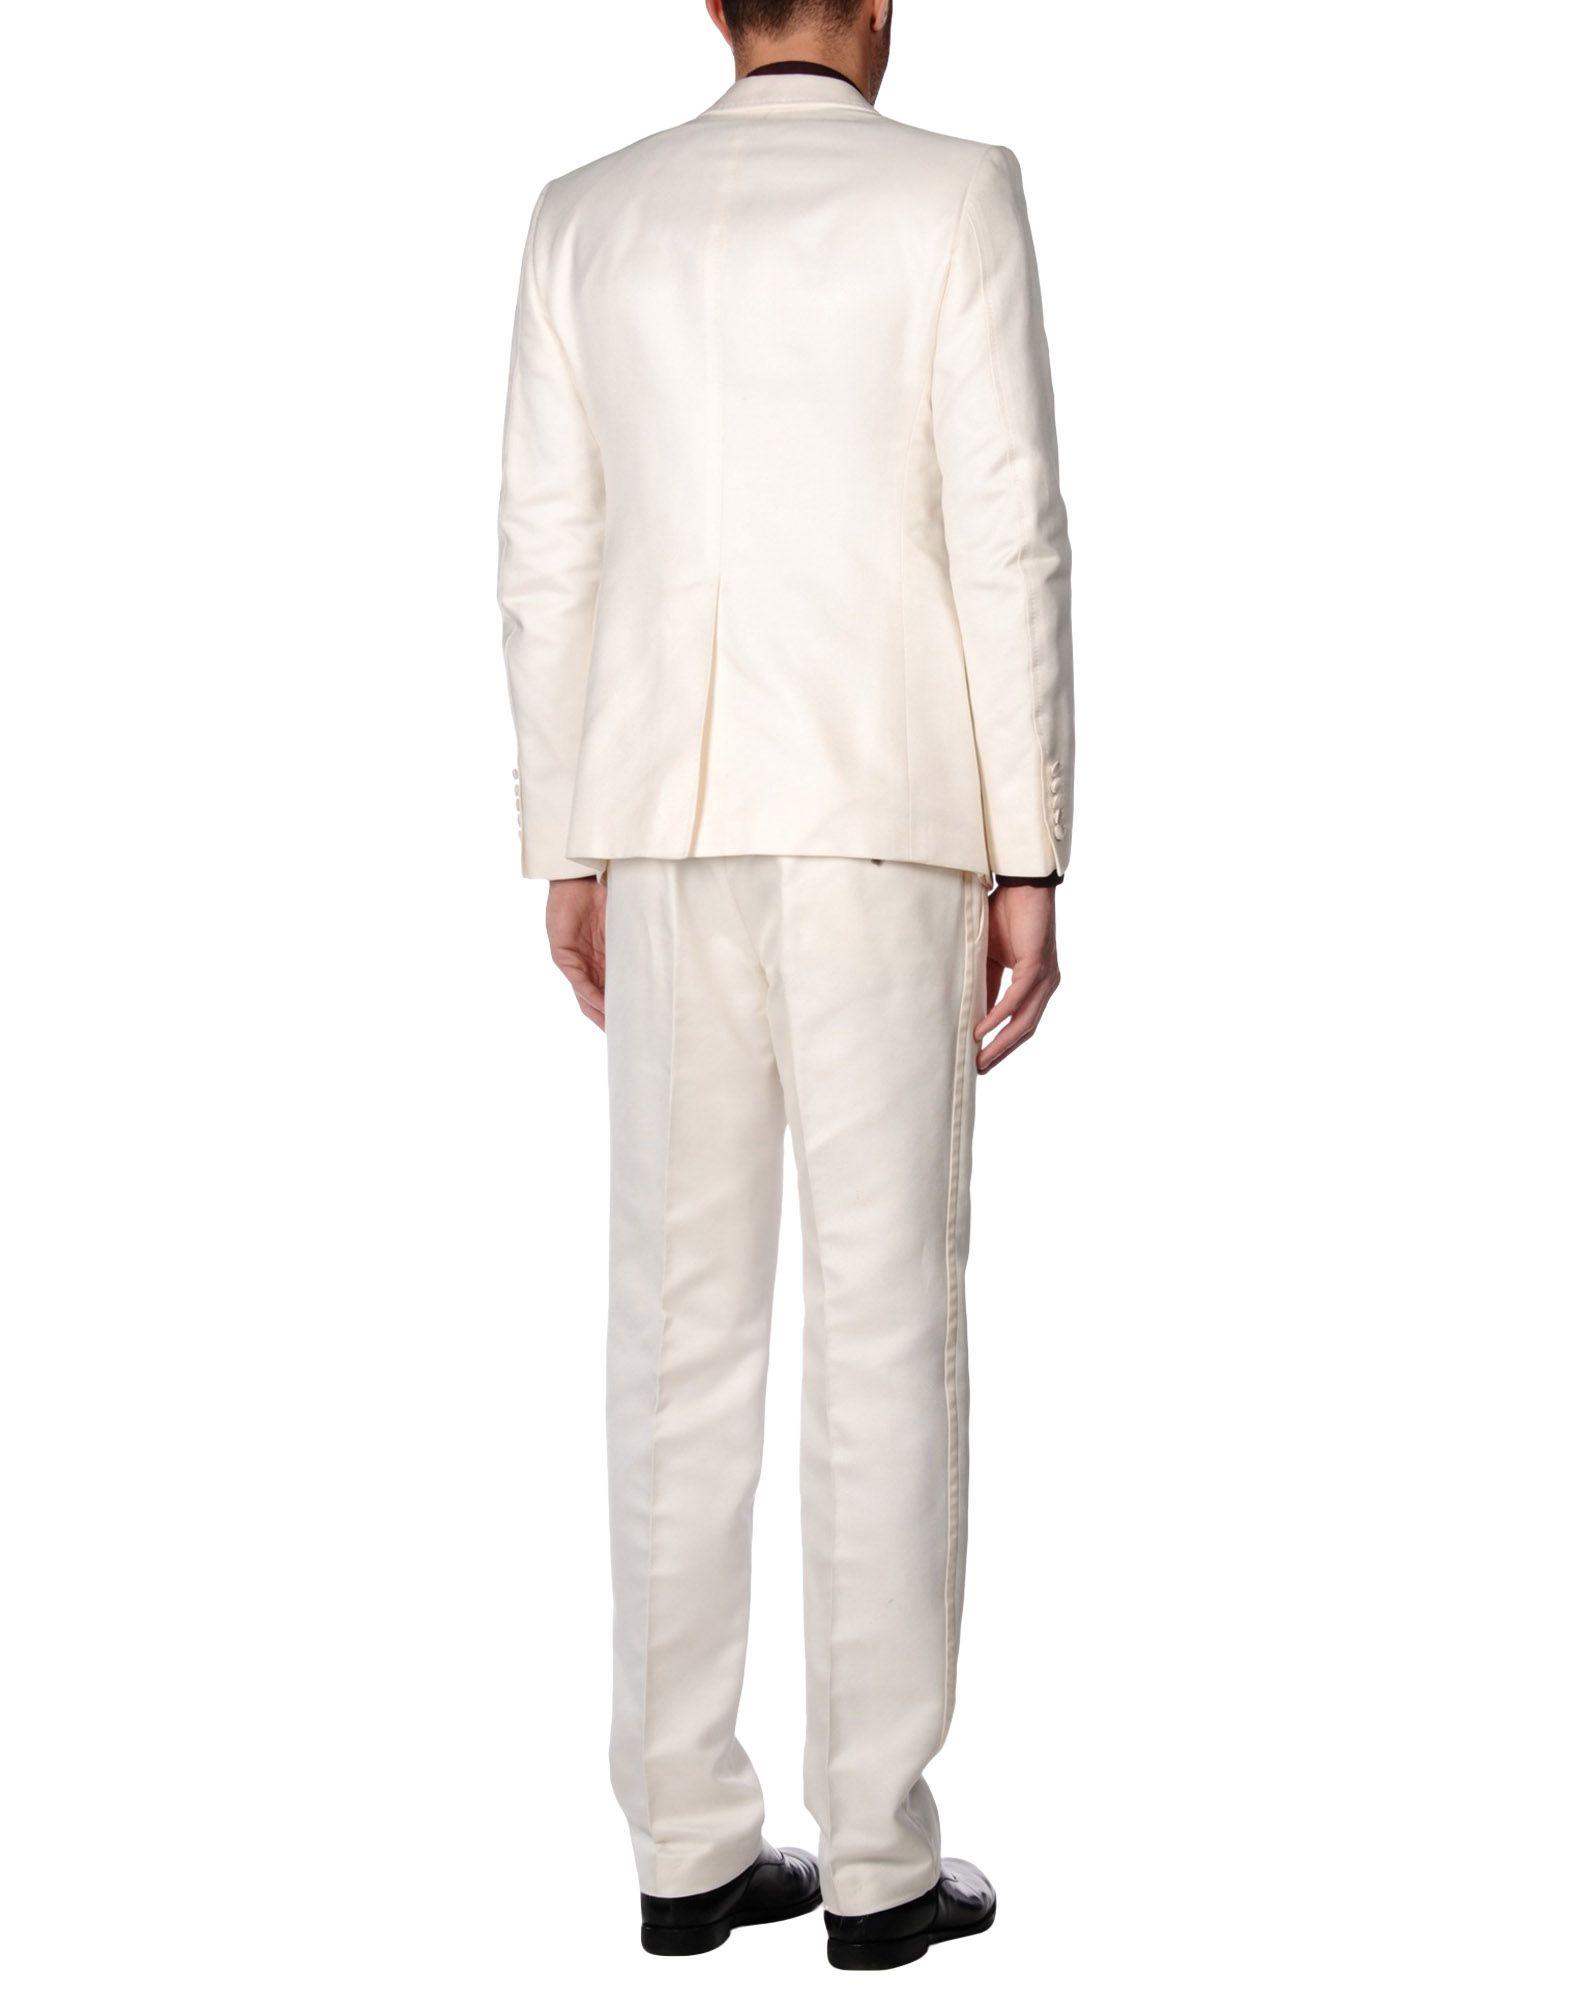 Gucci Cotton Suit in Ivory (White) for Men - Lyst